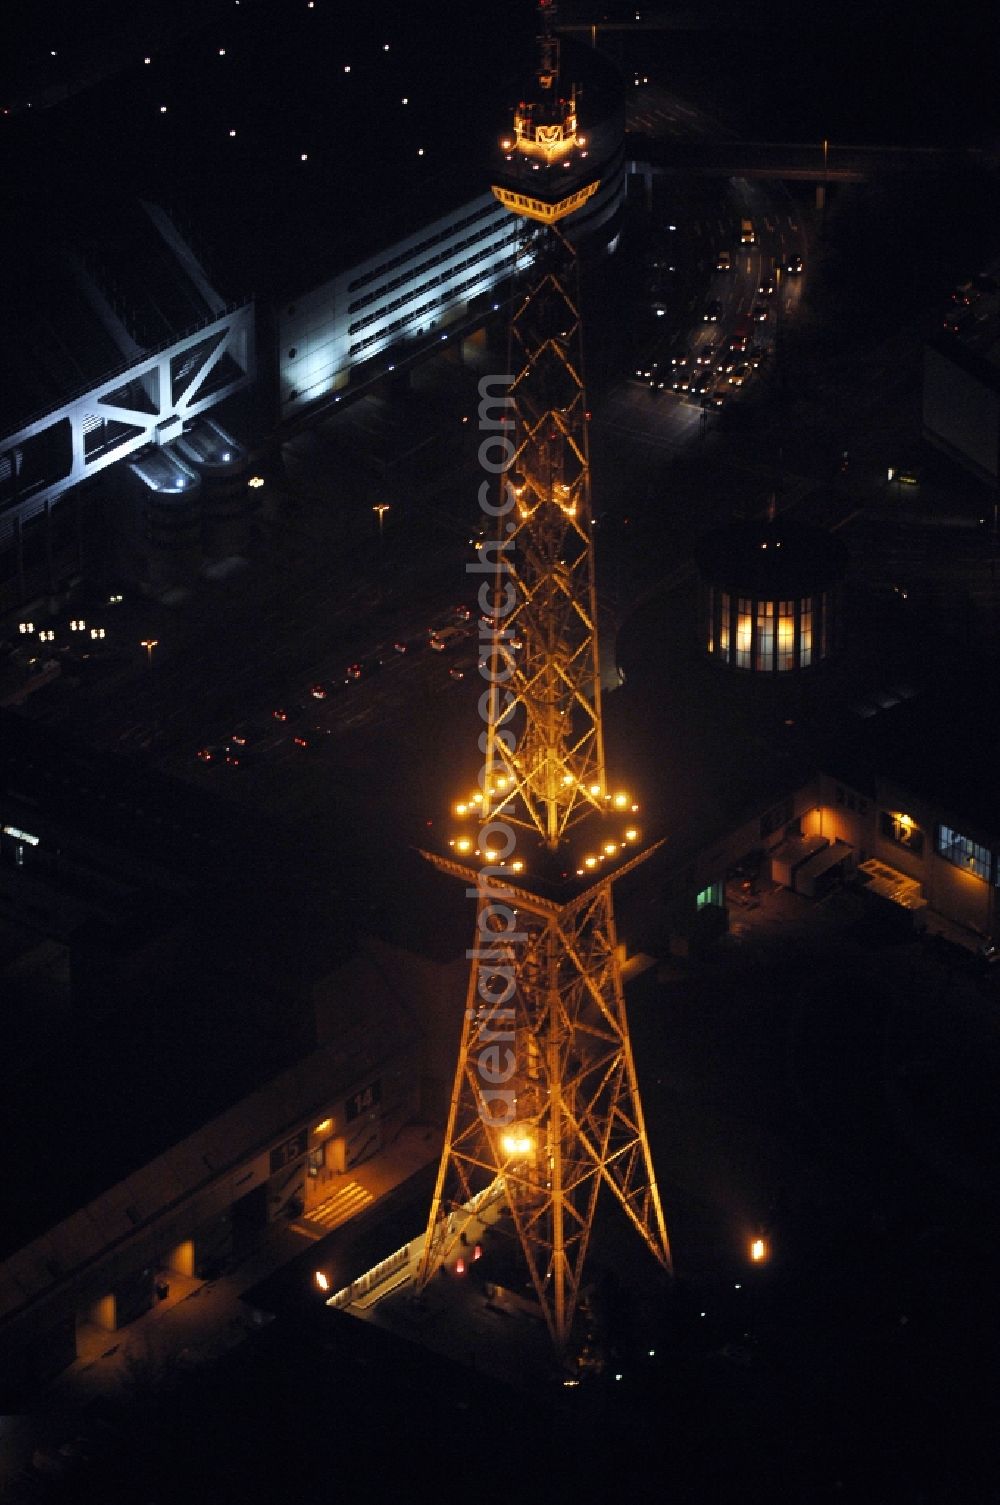 Berlin at night from above - Night lighting Tourist attraction and sightseeing Funkturm on Messegelaende in the district Charlottenburg in Berlin, Germany